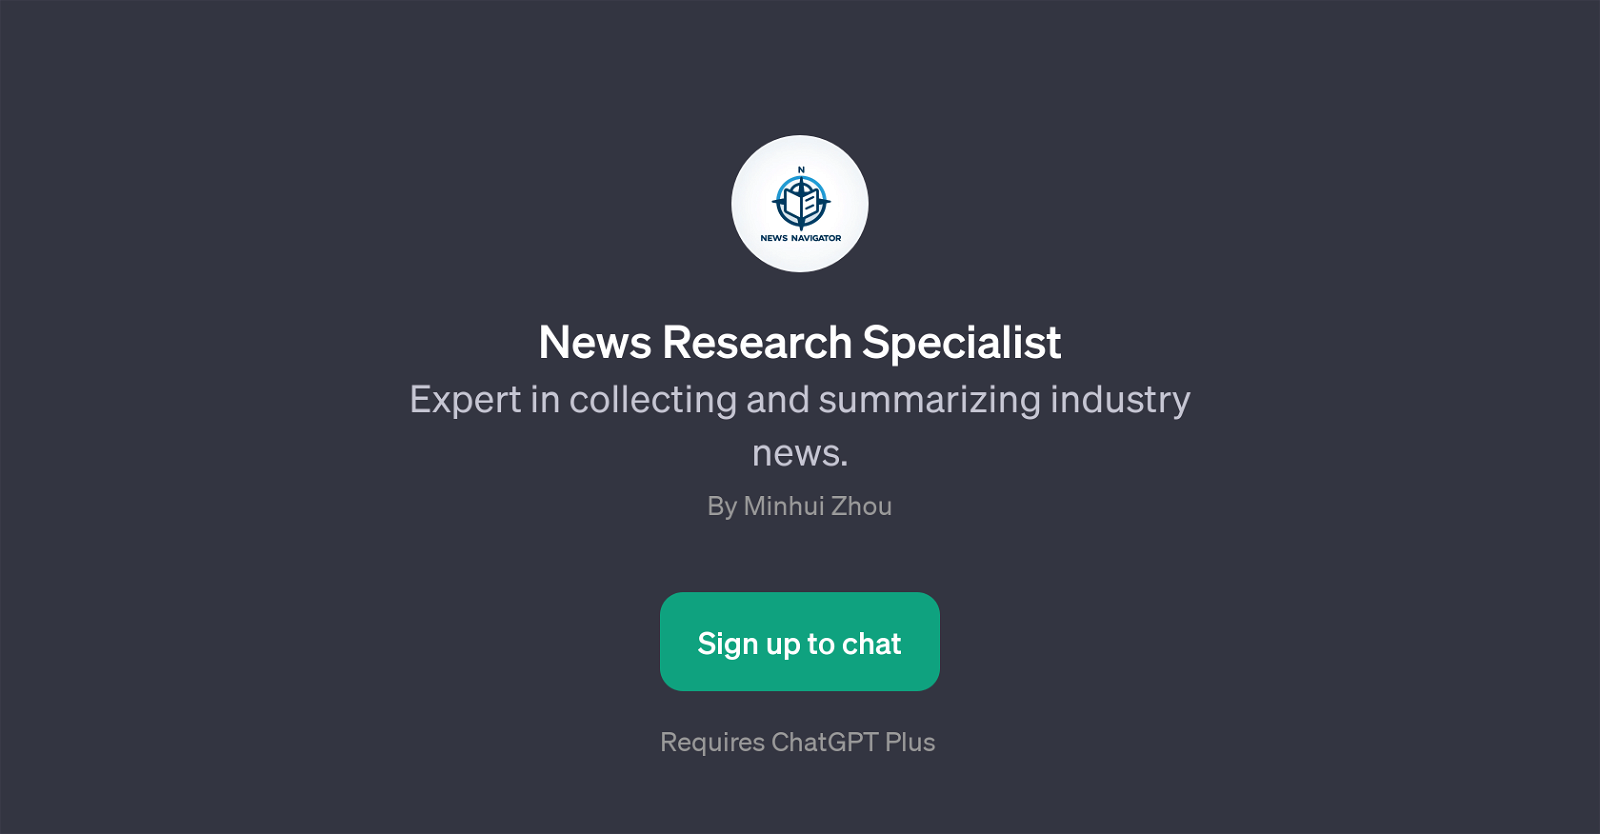 News Research Specialist website